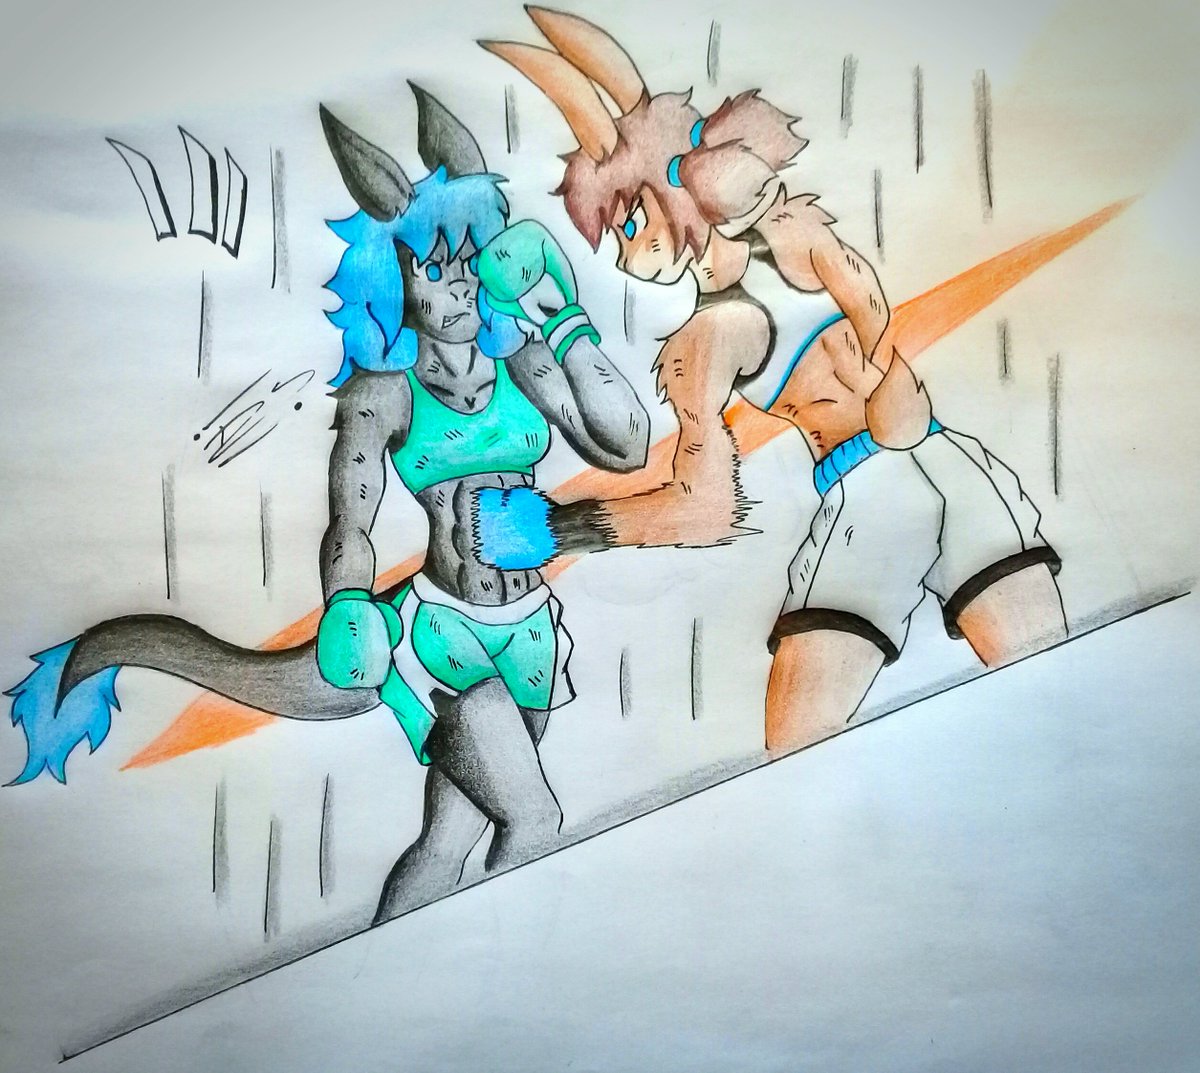 Katie faces Yupi in a boxing duel where they both give their all in the fight, which of them will win. This is my part of the art trade I hope you like it heh jupi is from: @kerplewy